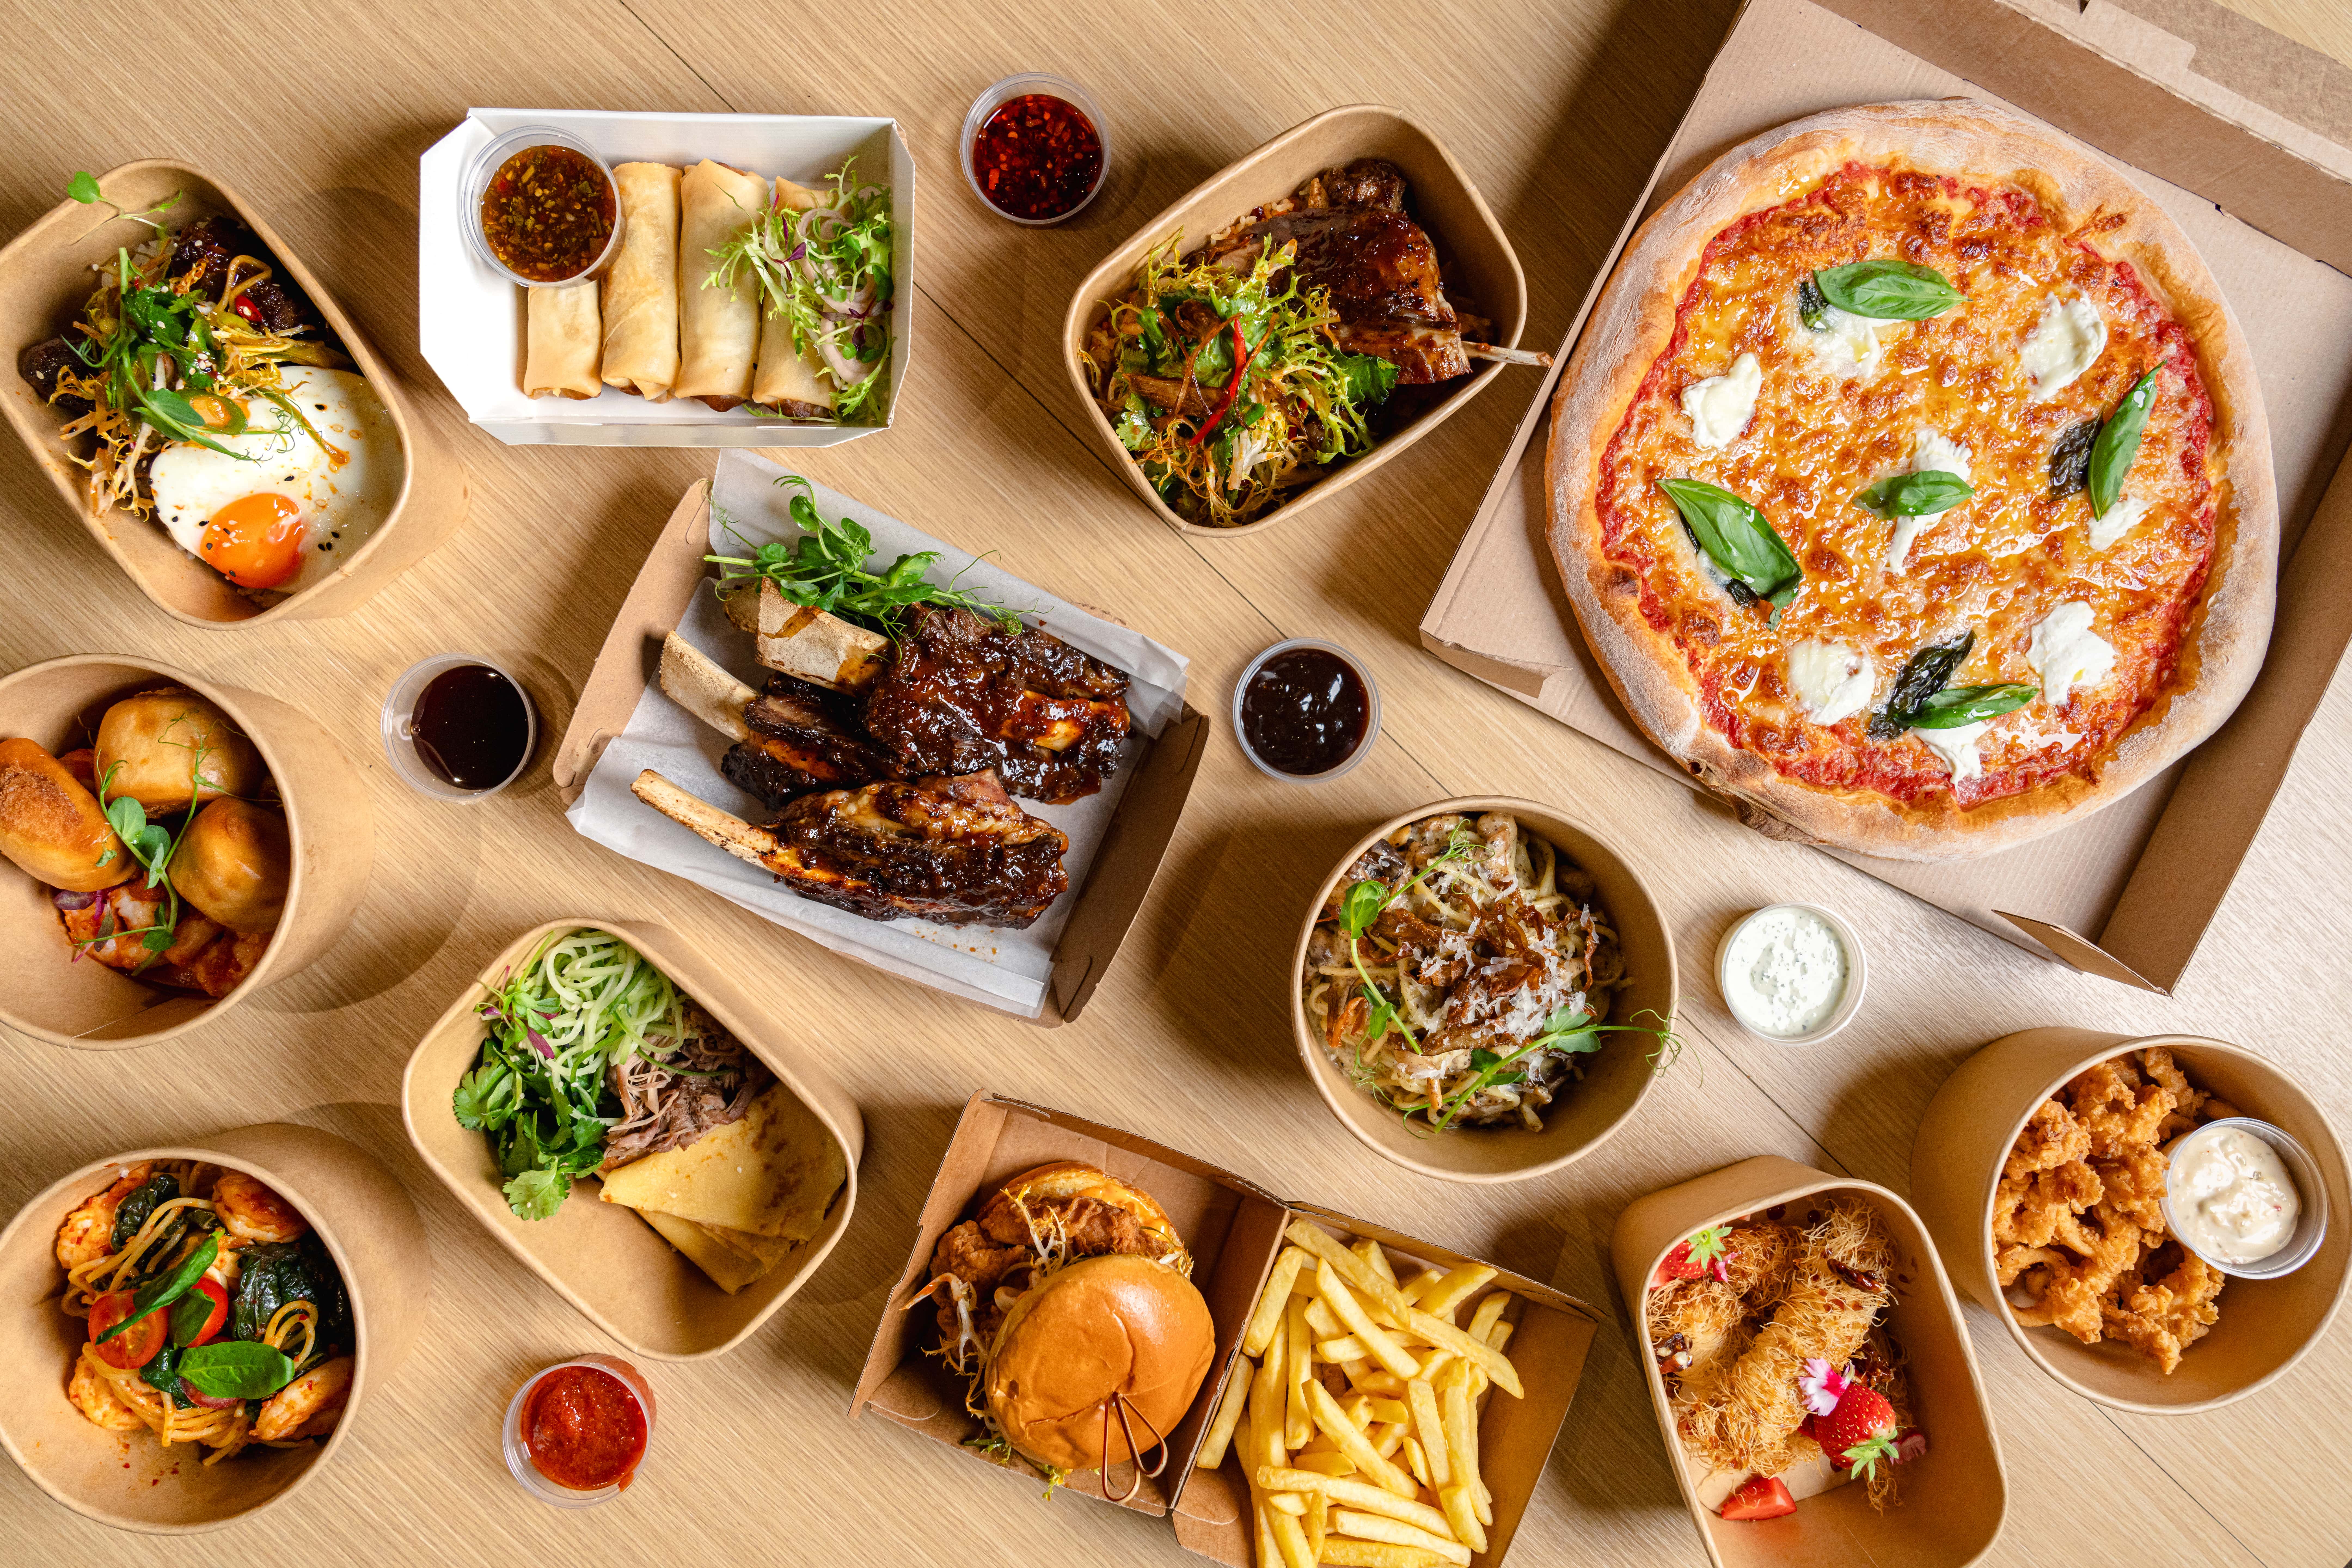 Our asian-fusion halal steakhouse in Paddington is out for food delivery in London through deliveroo!